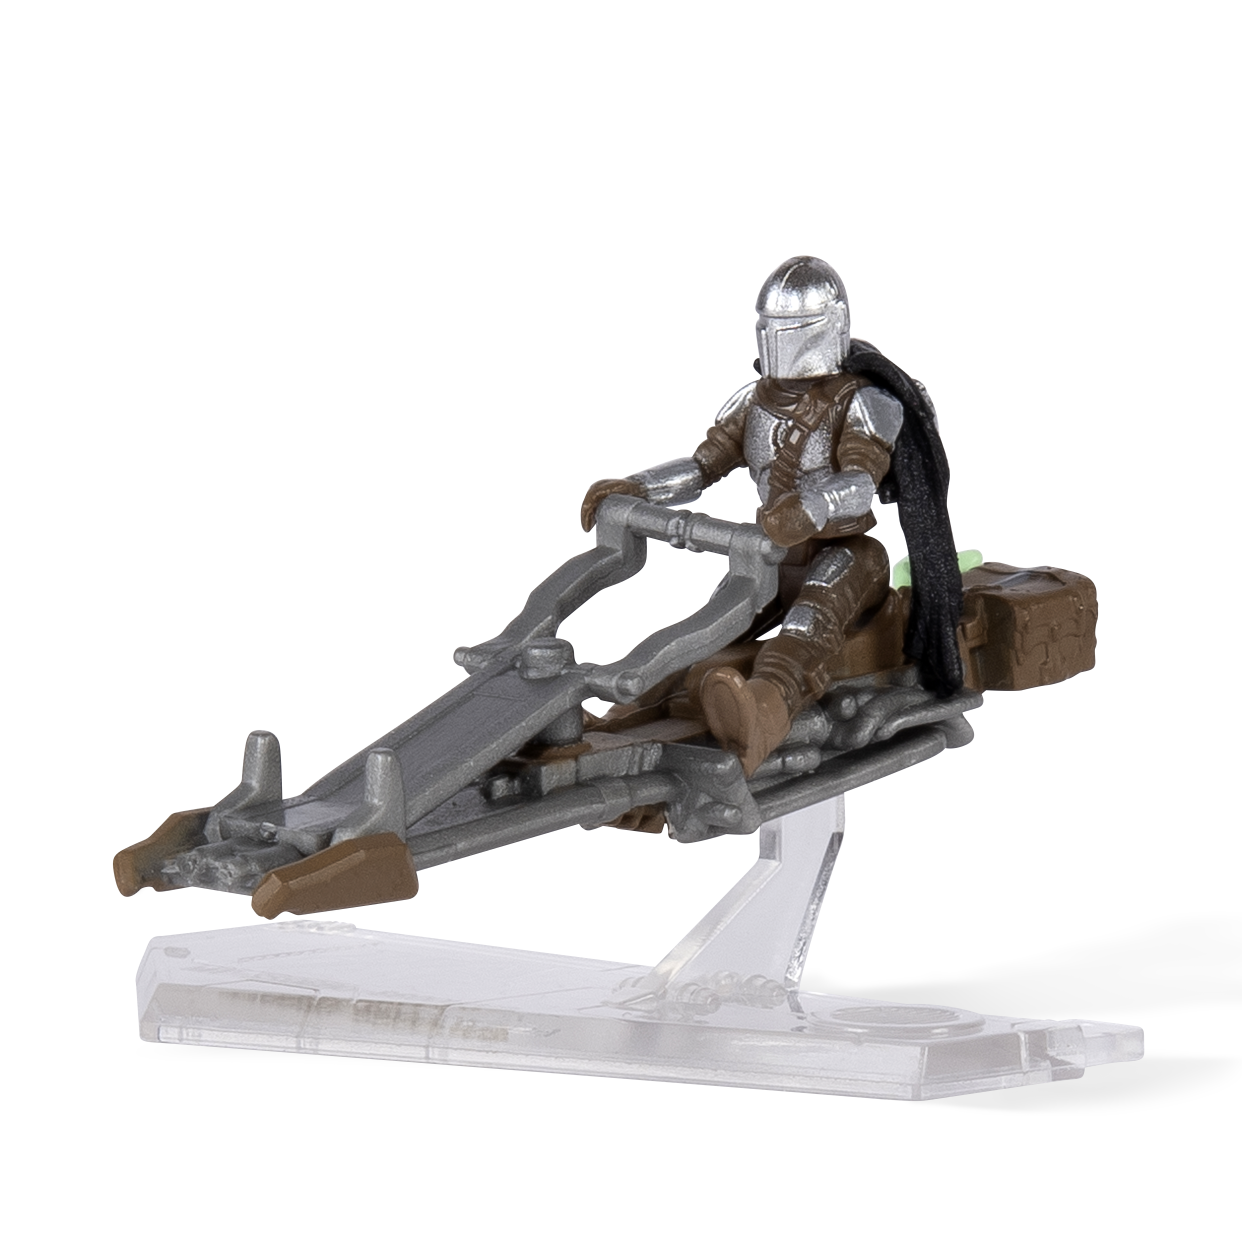 A Mandalorian Speeder Bike is among the items you can find in a Star Wars Micro Galaxy Squardron Mystery Pack. (Photo: Jazwares)